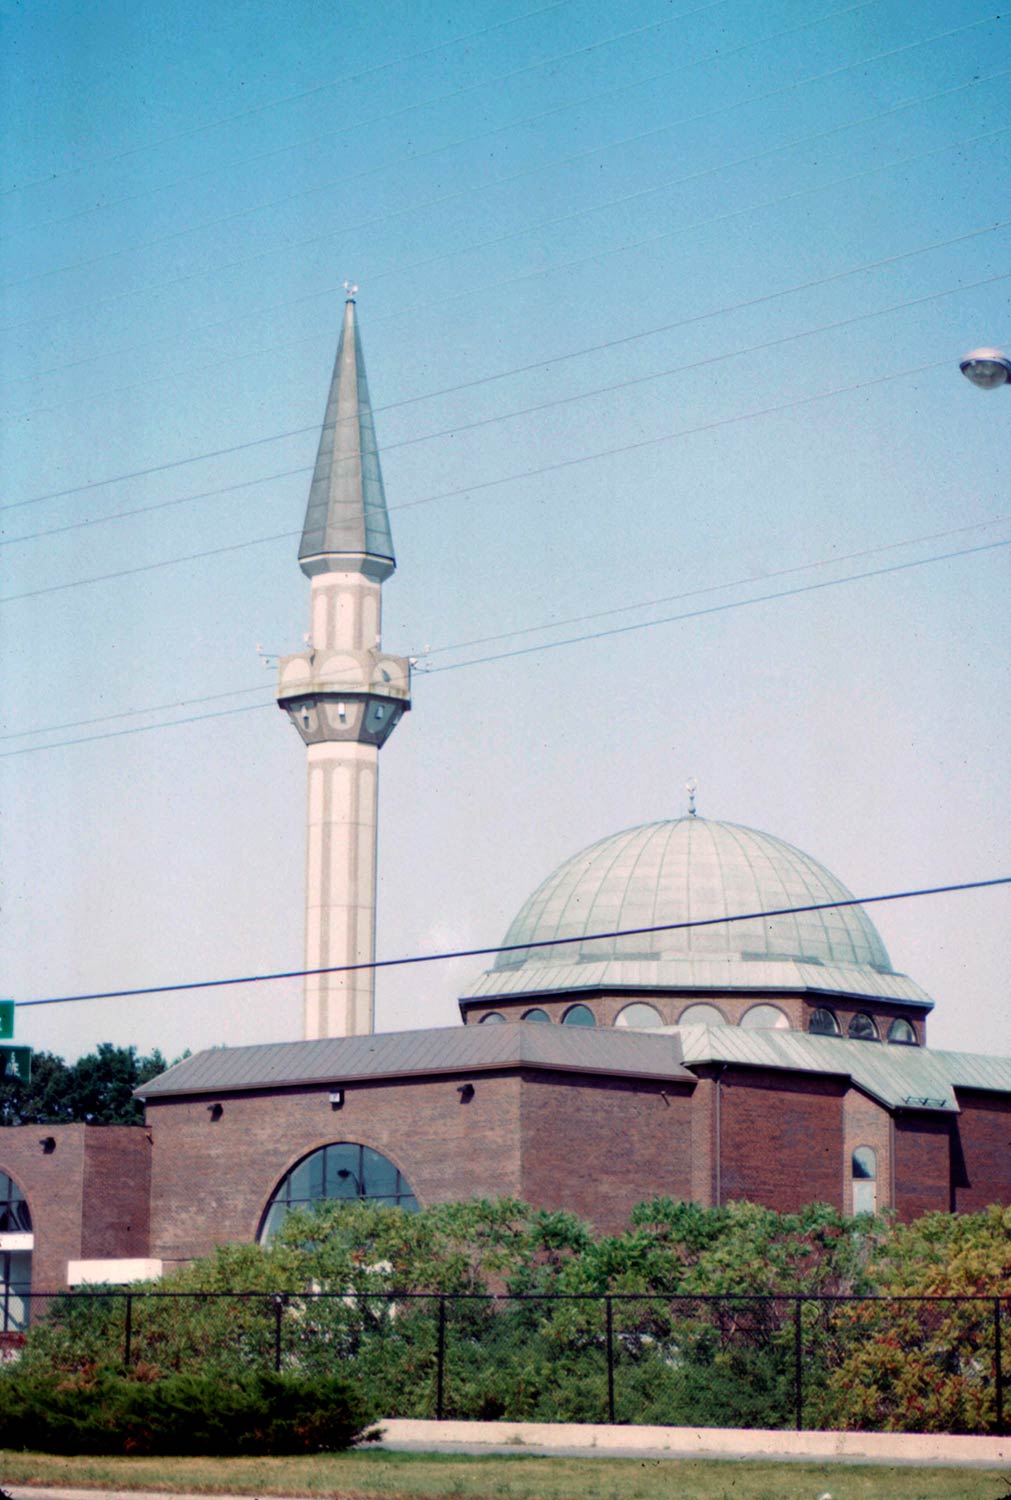 Ottawa Mosque - View from the southeast, with the dome and minaret